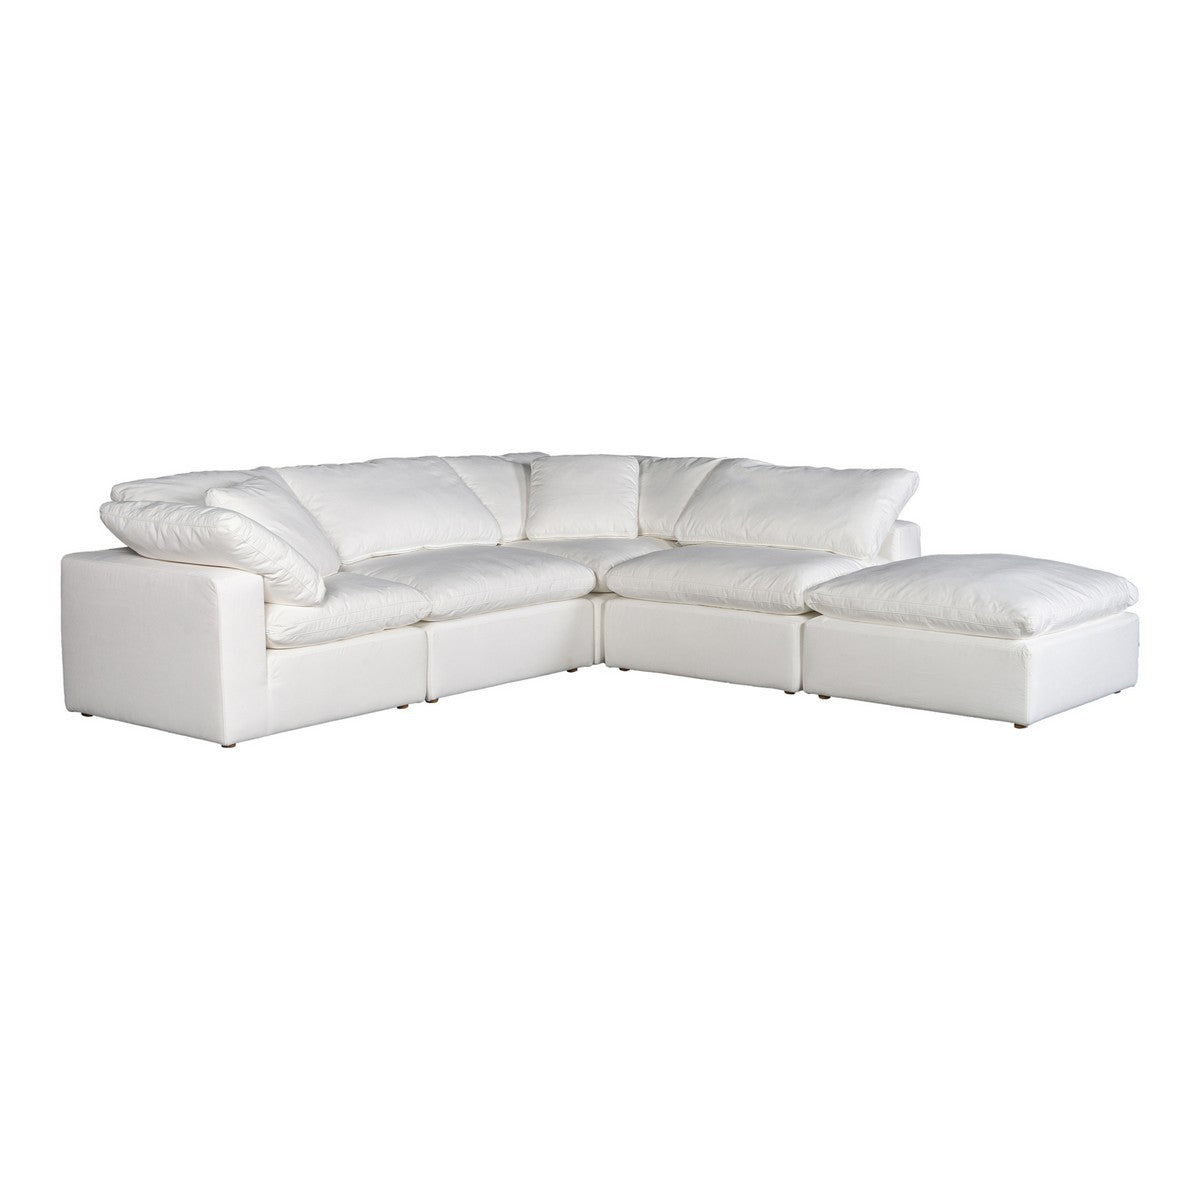 Moe's Home Collection Clay Dream Modular Sectional Livesmart Fabric Cream - YJ-1011-05